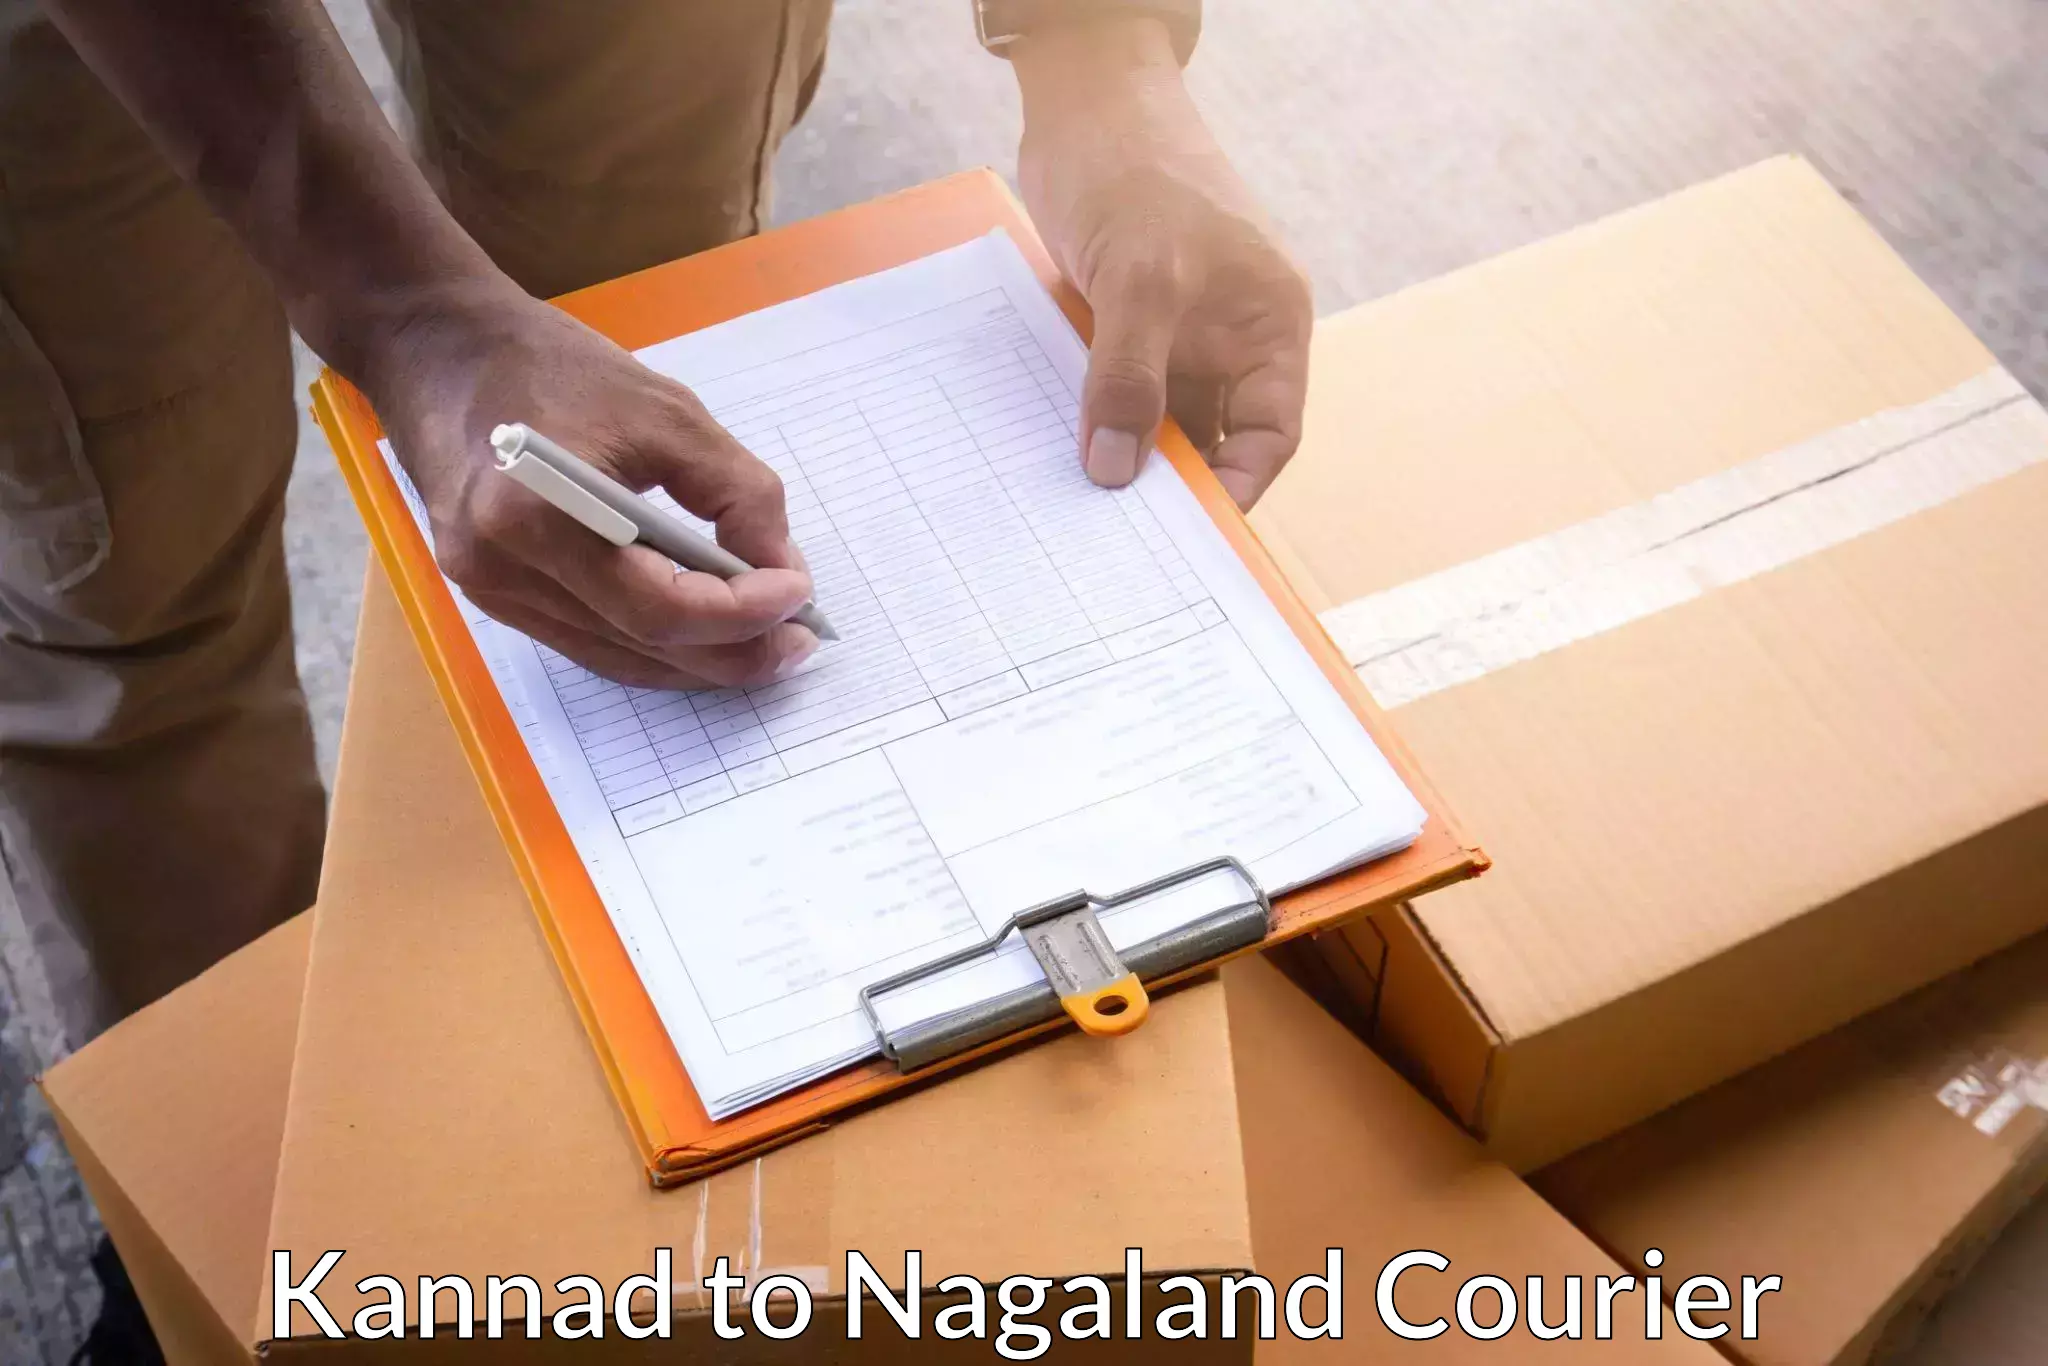 Specialized shipment handling in Kannad to Mokokchung